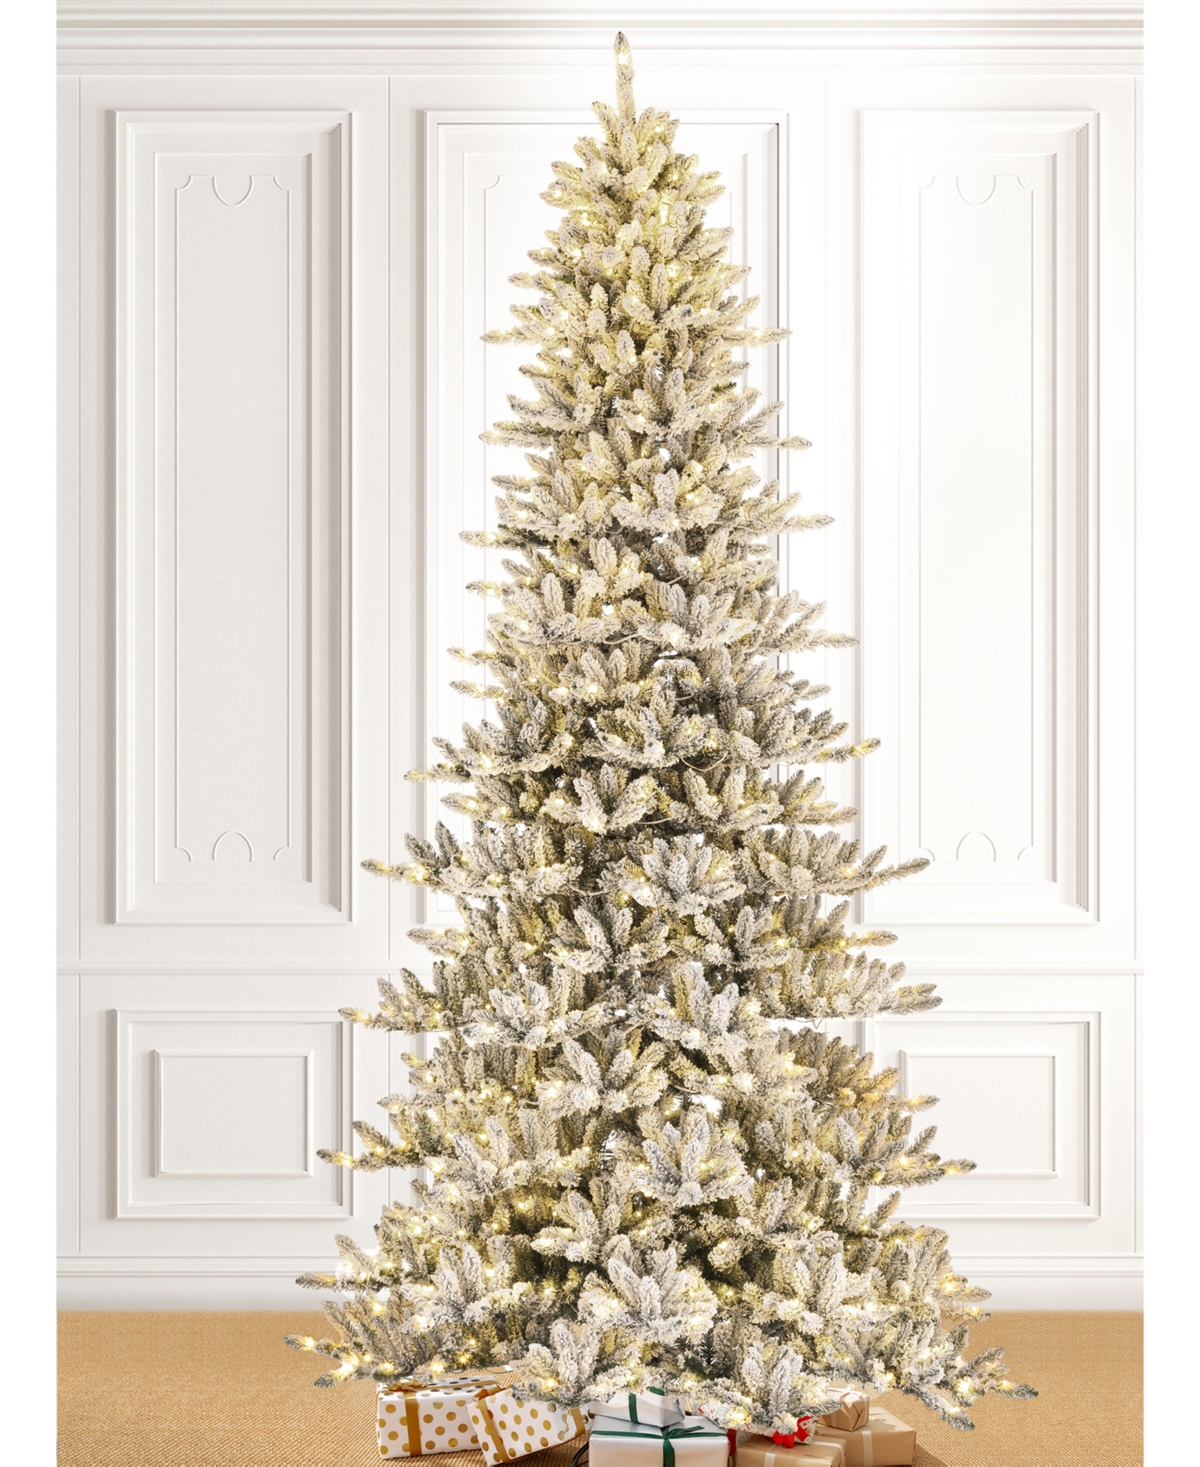 Pre-Lit Flocked Slim Fir Artificial Christmas Tree with 950 Warm White Lights, 11' - Multi